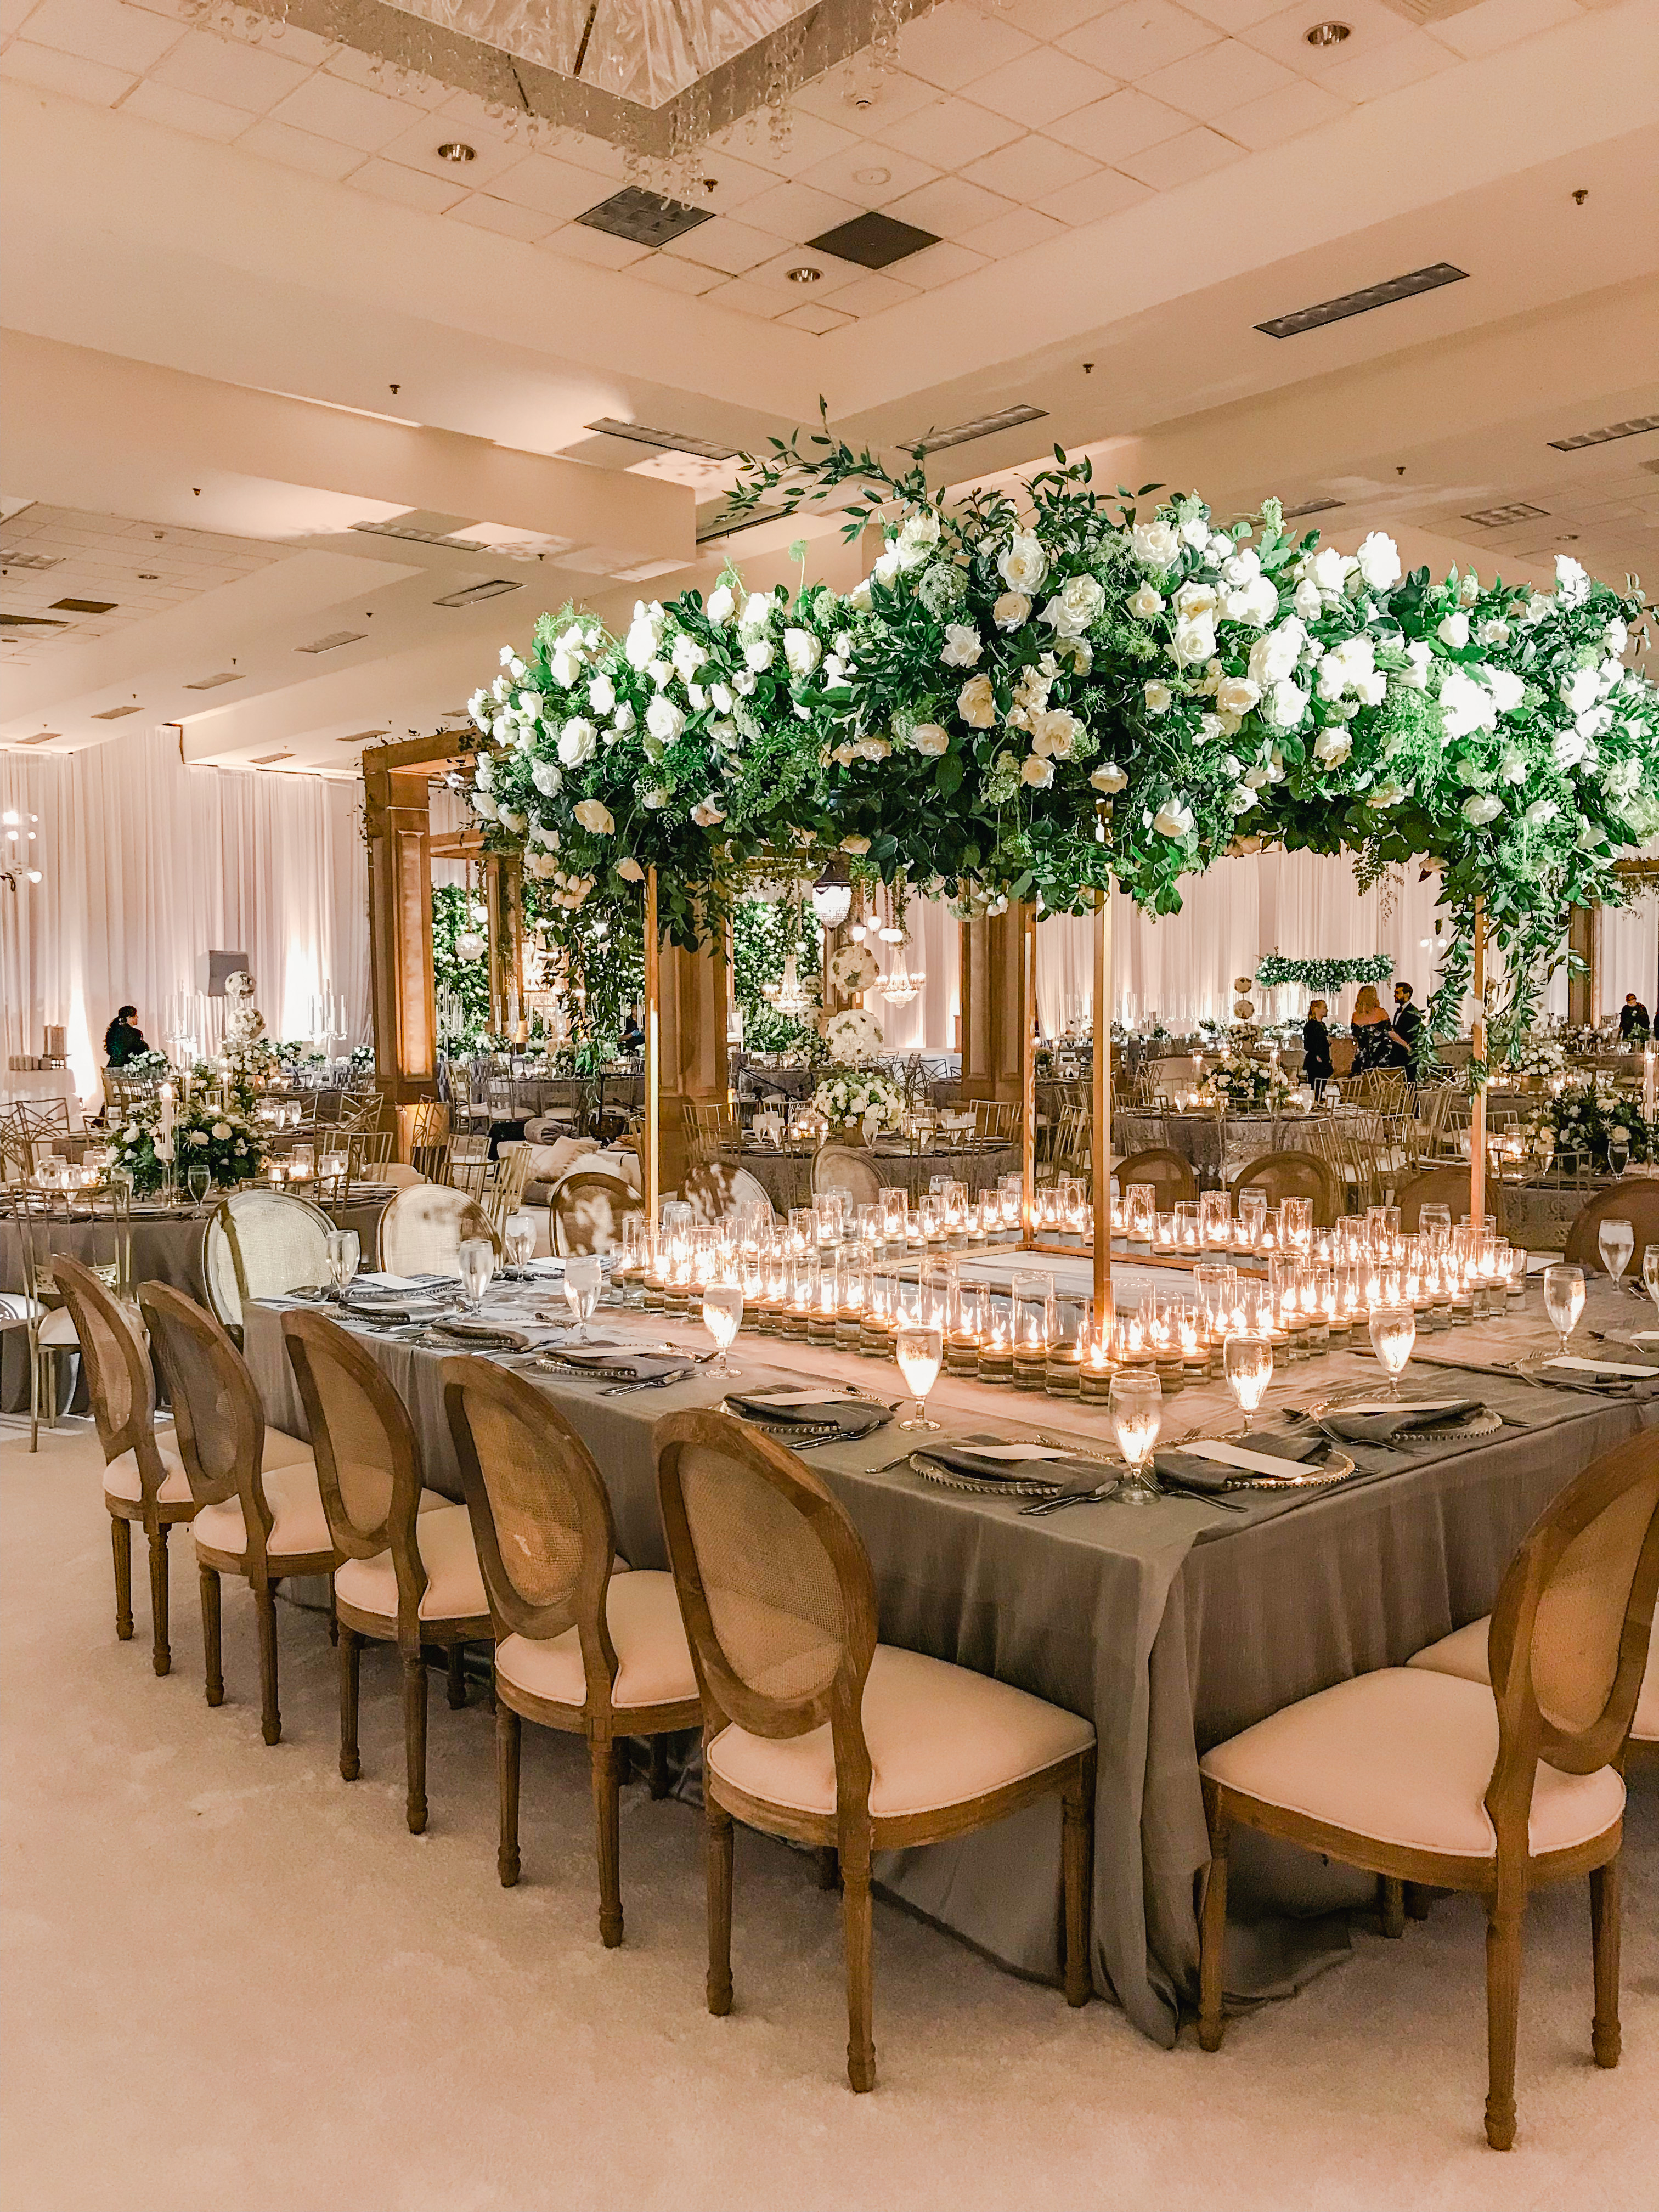 5 Wedding Reception Table Layouts Your, How To Arrange Rectangular Tables For A Wedding Reception